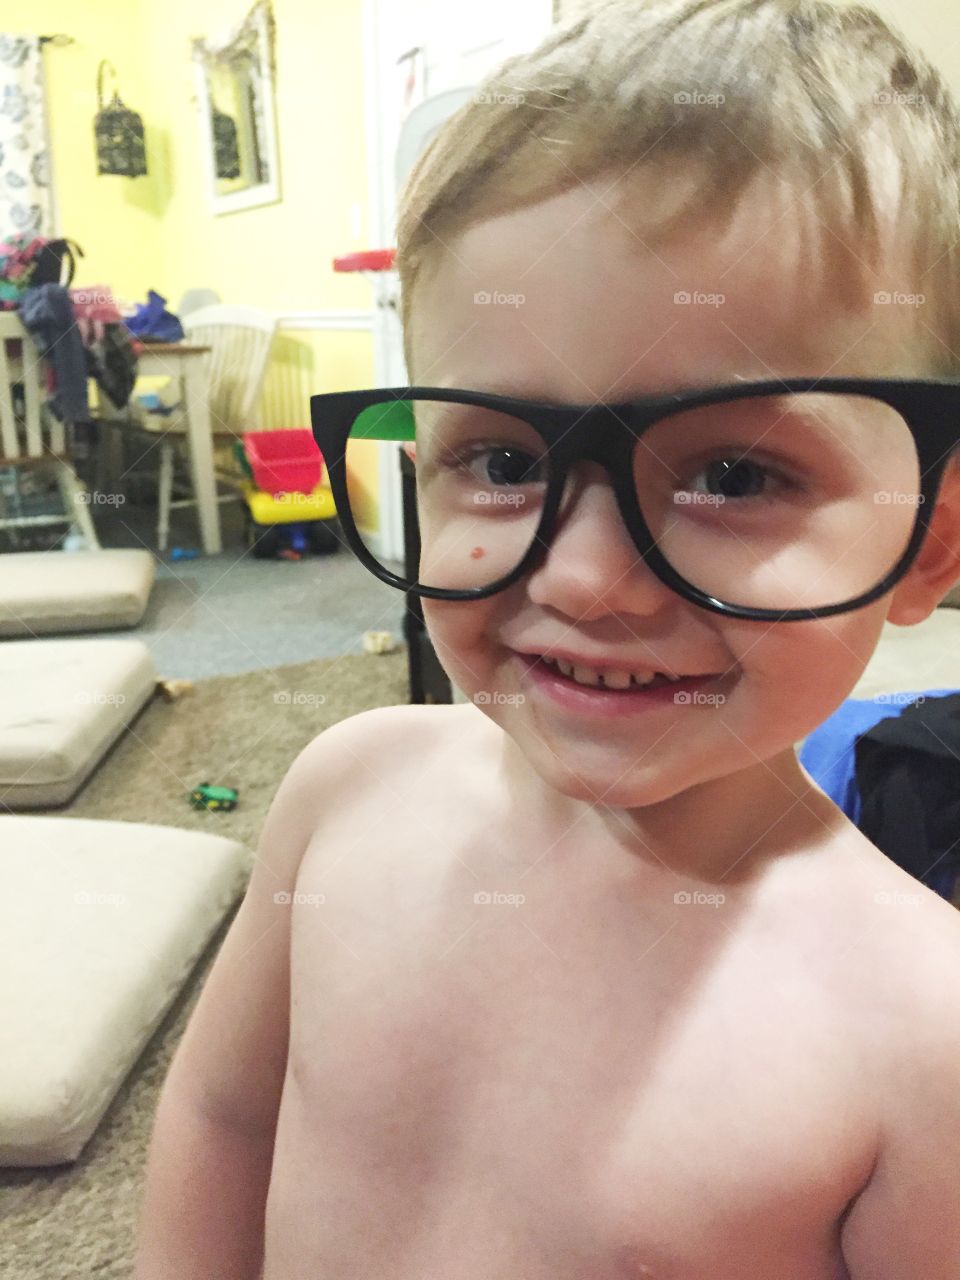 Shirtless boy with large spectacles